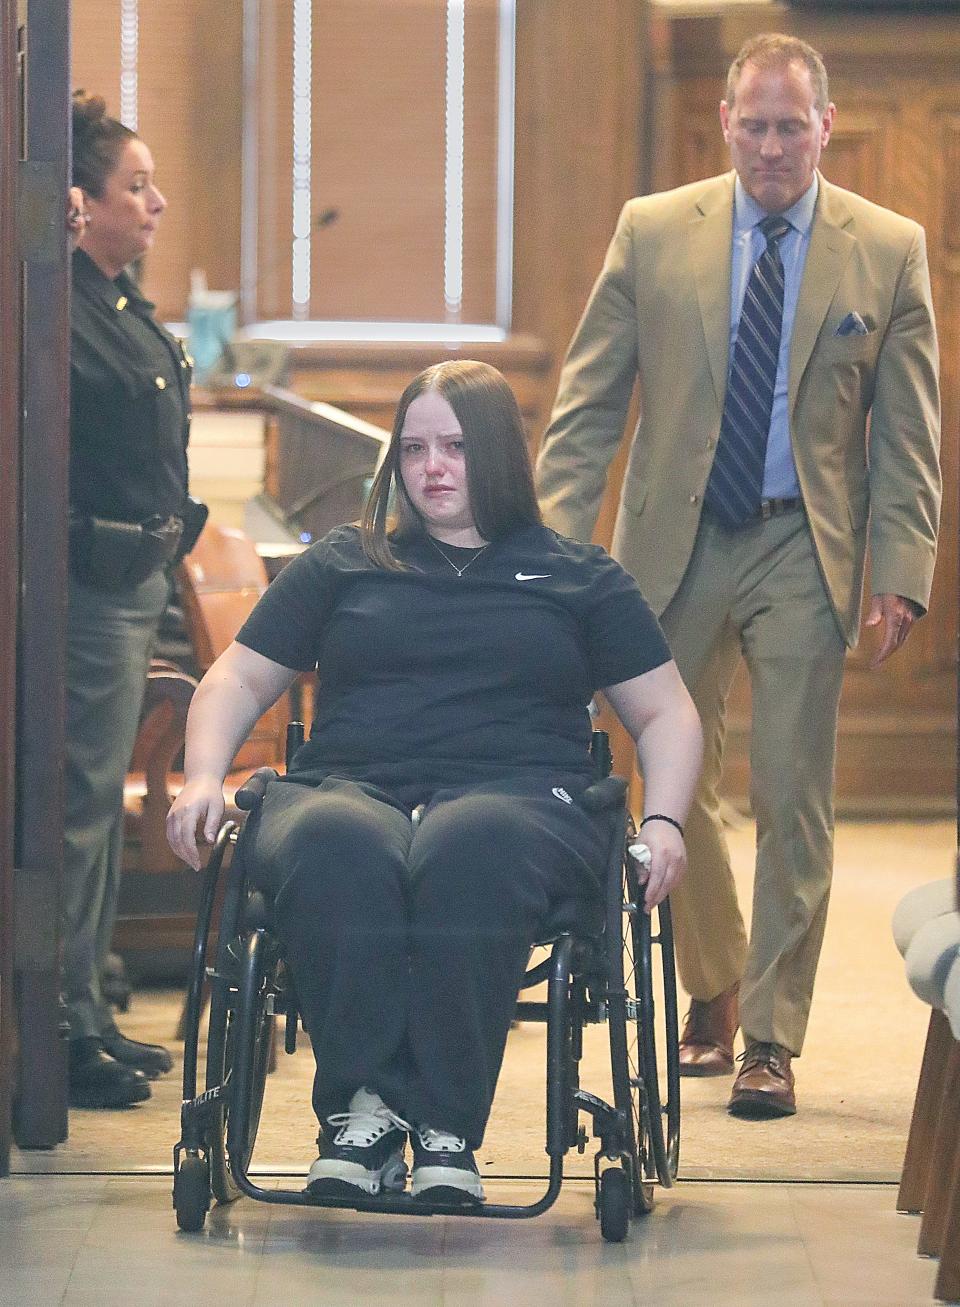 Jessica Skinner leaves a Summit County courtroom Wednesday with her attorney Tom Bauer after she pleaded guilty to aggravated vehicular homicide. Skinner, who was left paralyzed by the crash that fatally injured a Canton woman, will be sentenced Oct. 11.